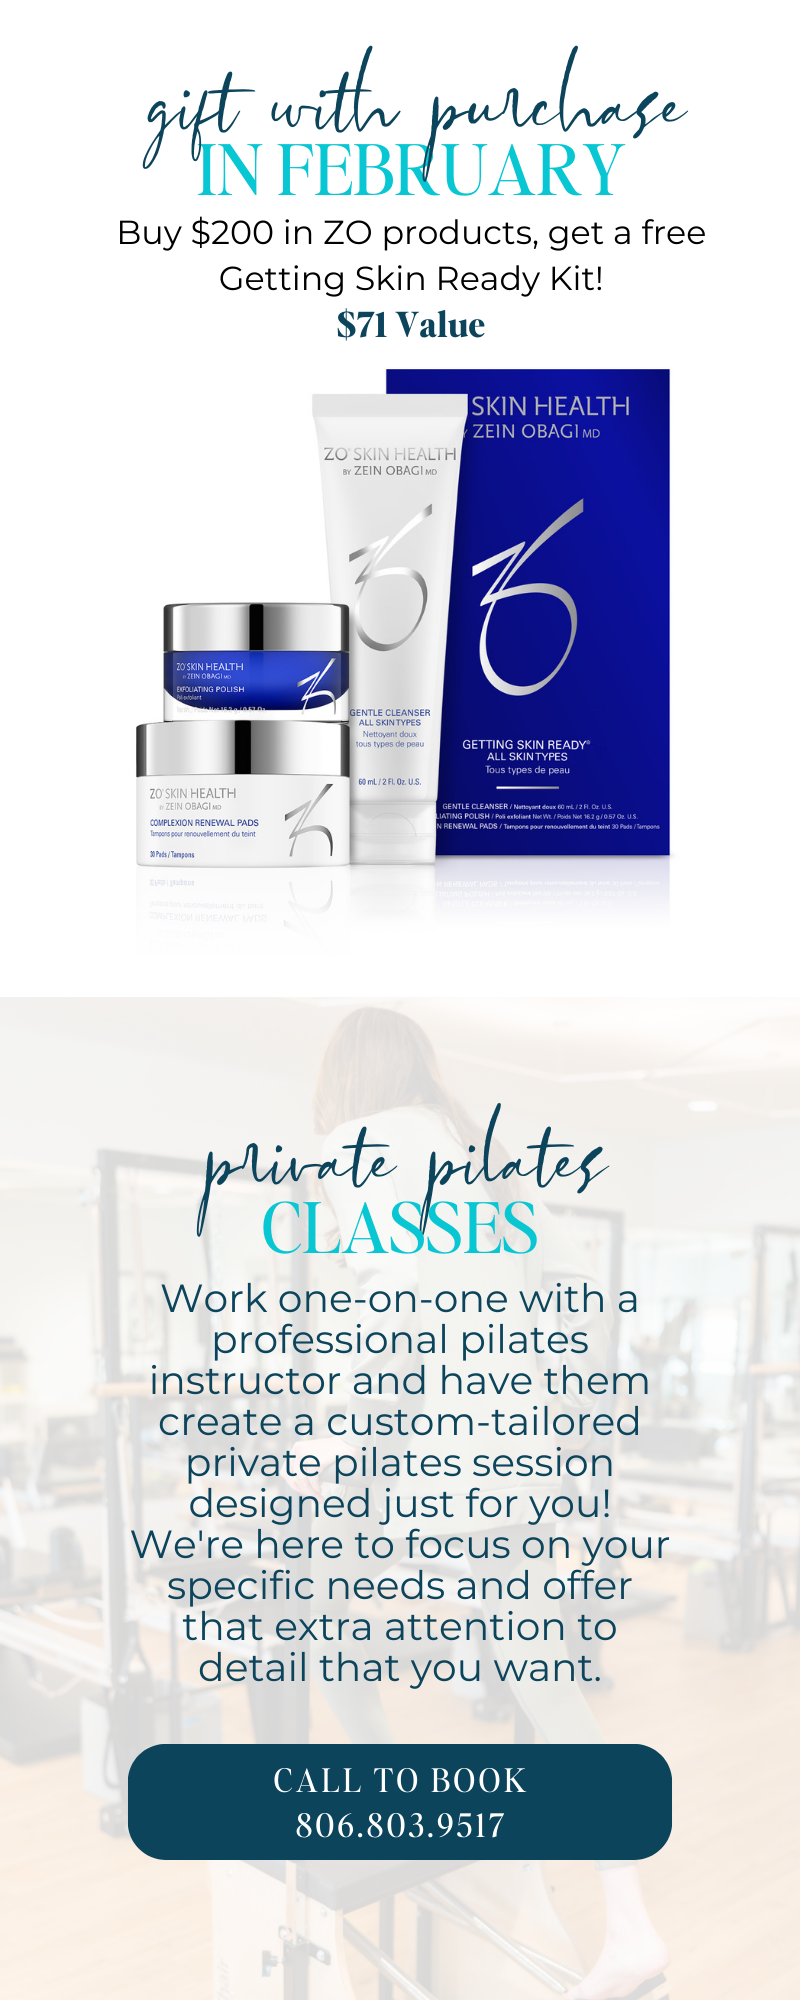 Buy $200 in ZO products, get a Free Getting Ready Skin Kit! Private pilates lessons are now available.